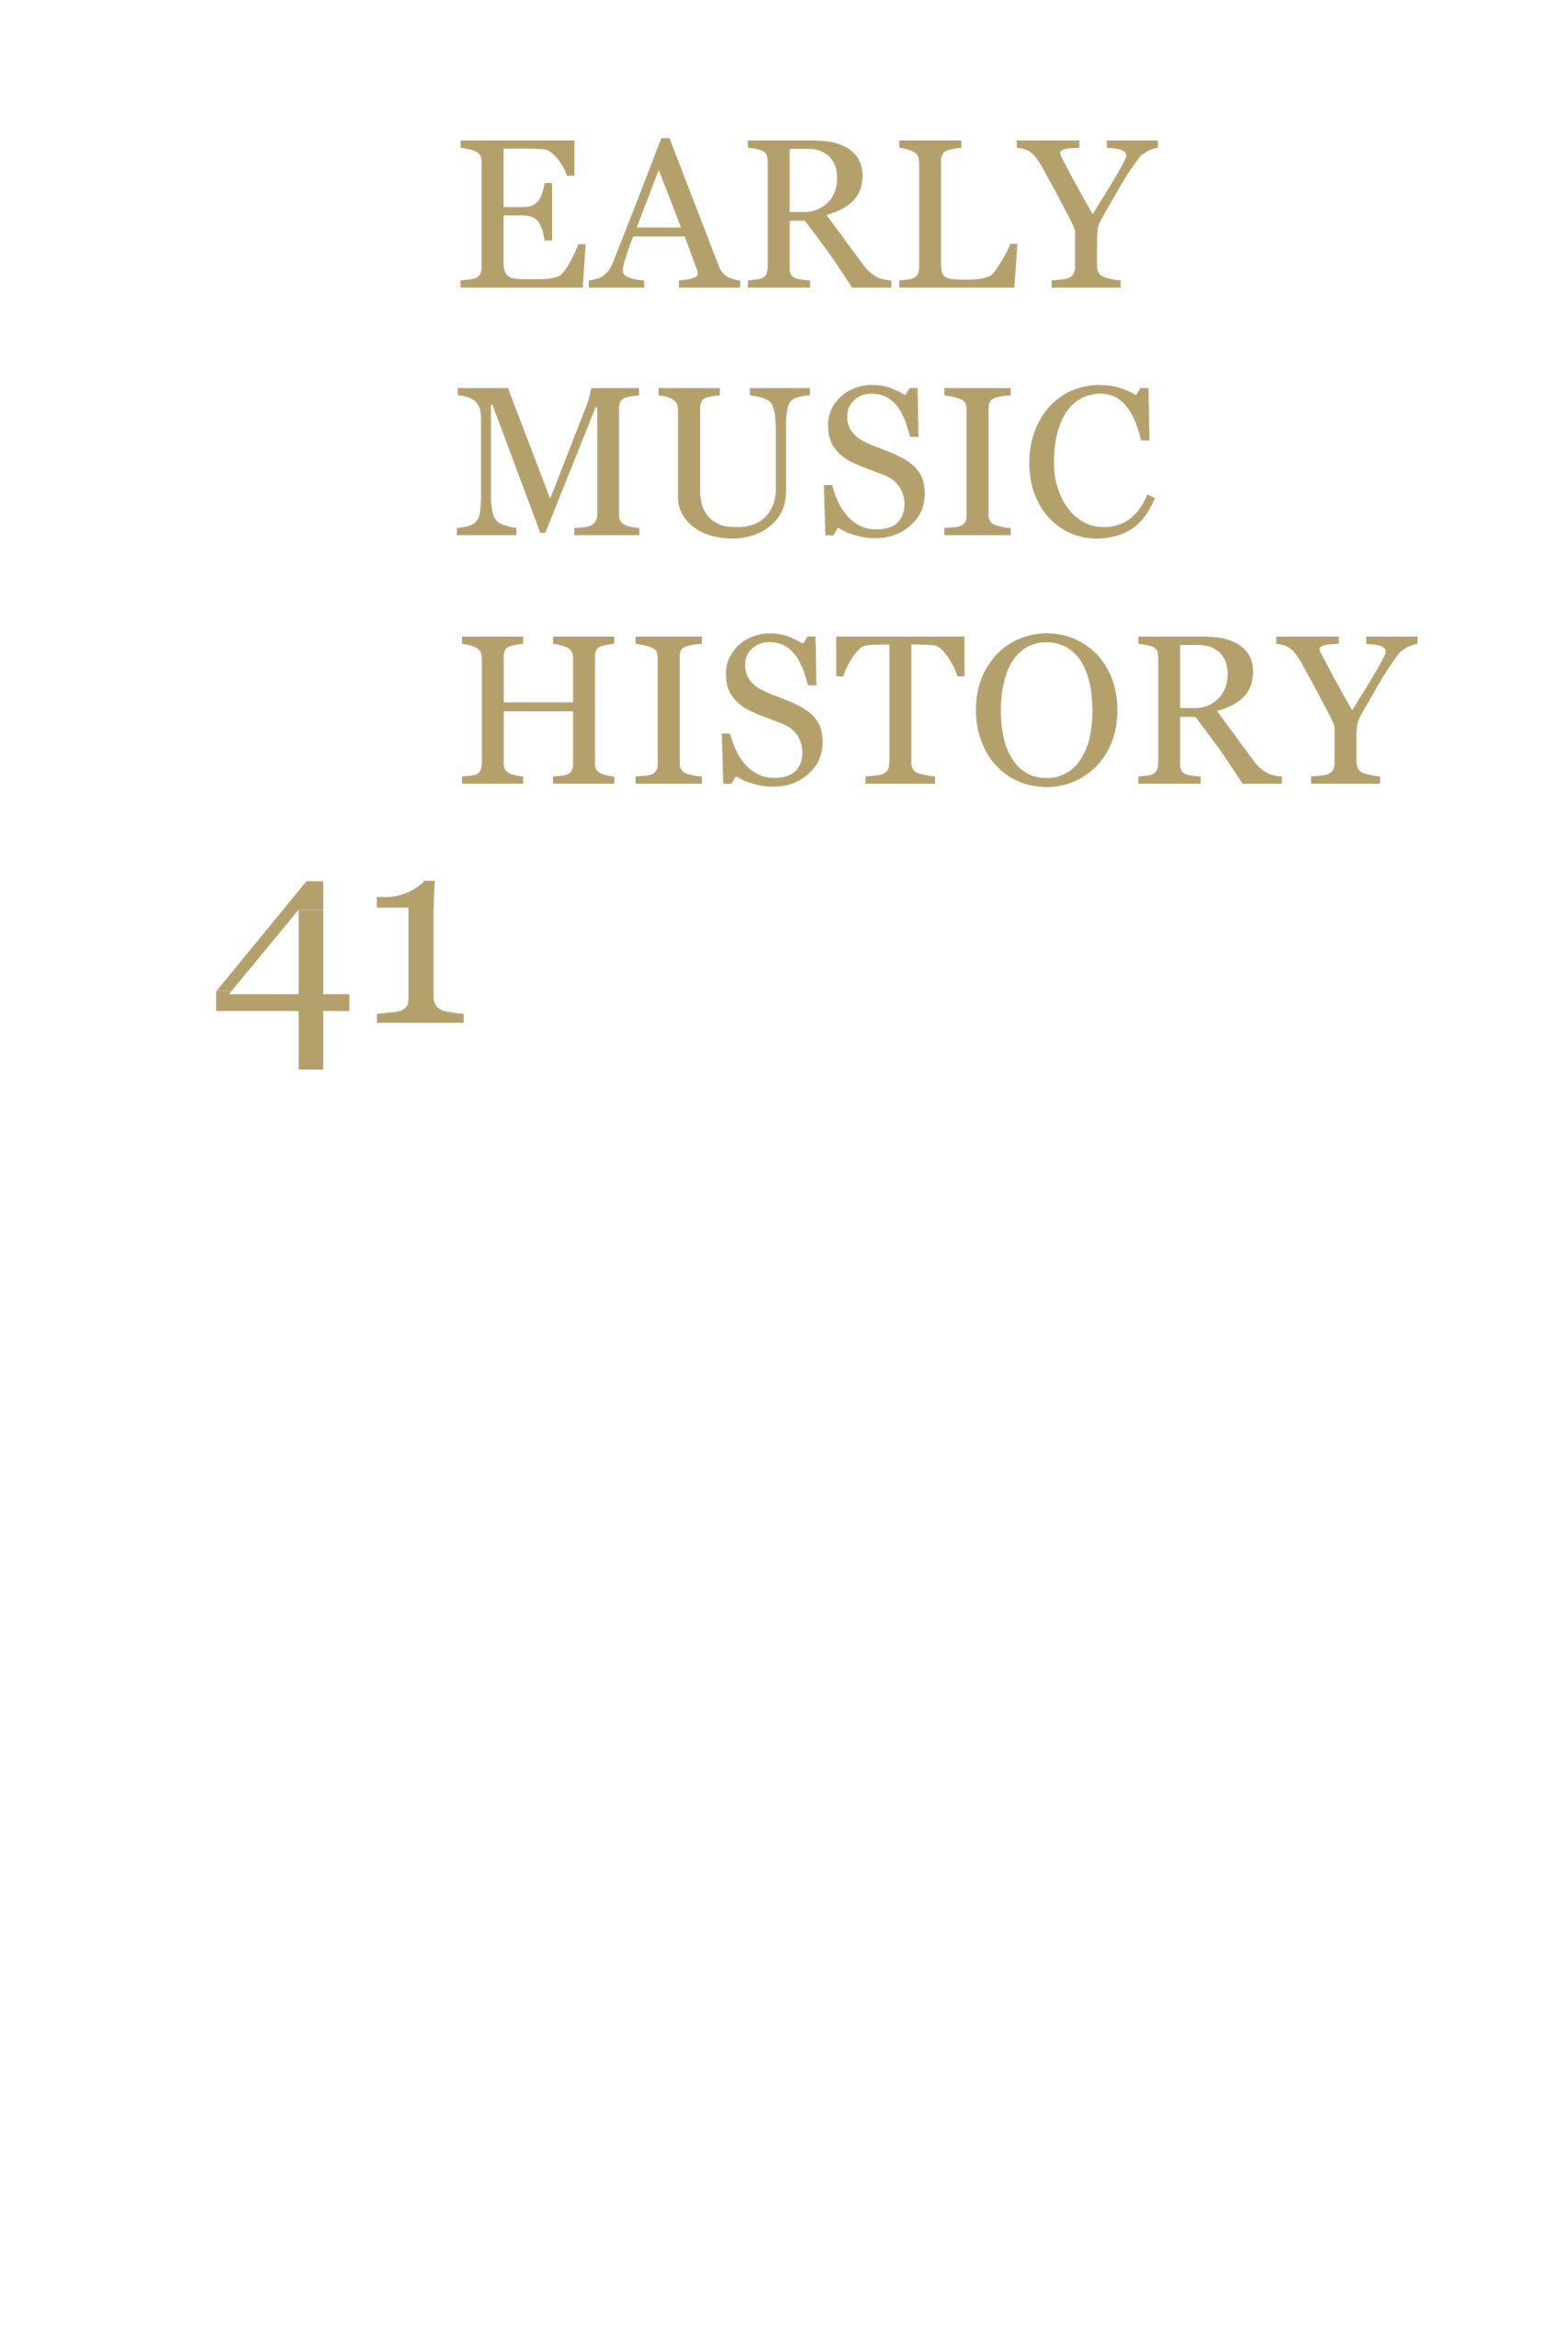 Dictionary of Music and Musicians, Volume 4 - Page 770 - UNT Digital Library